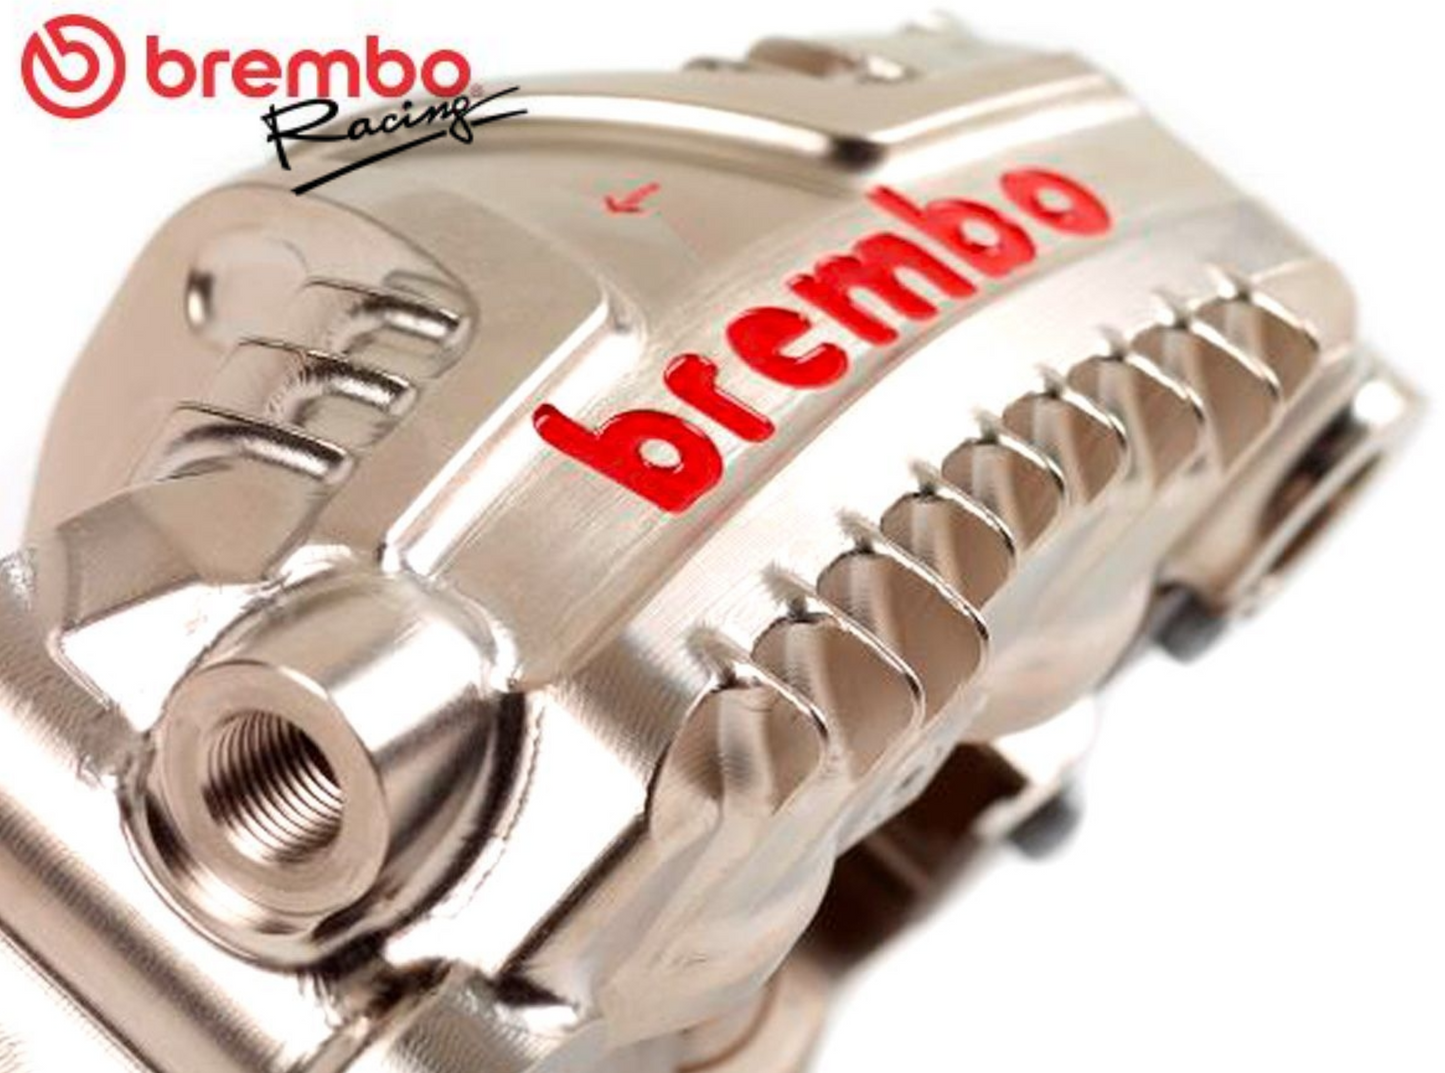 5/9 In stock in Italy Brembo GP4-LM Endurance Radial Monoblock CNC Caliper Nickel Coated 108mm Pitch XC1AB10 XC1AB11 Brembo Racing